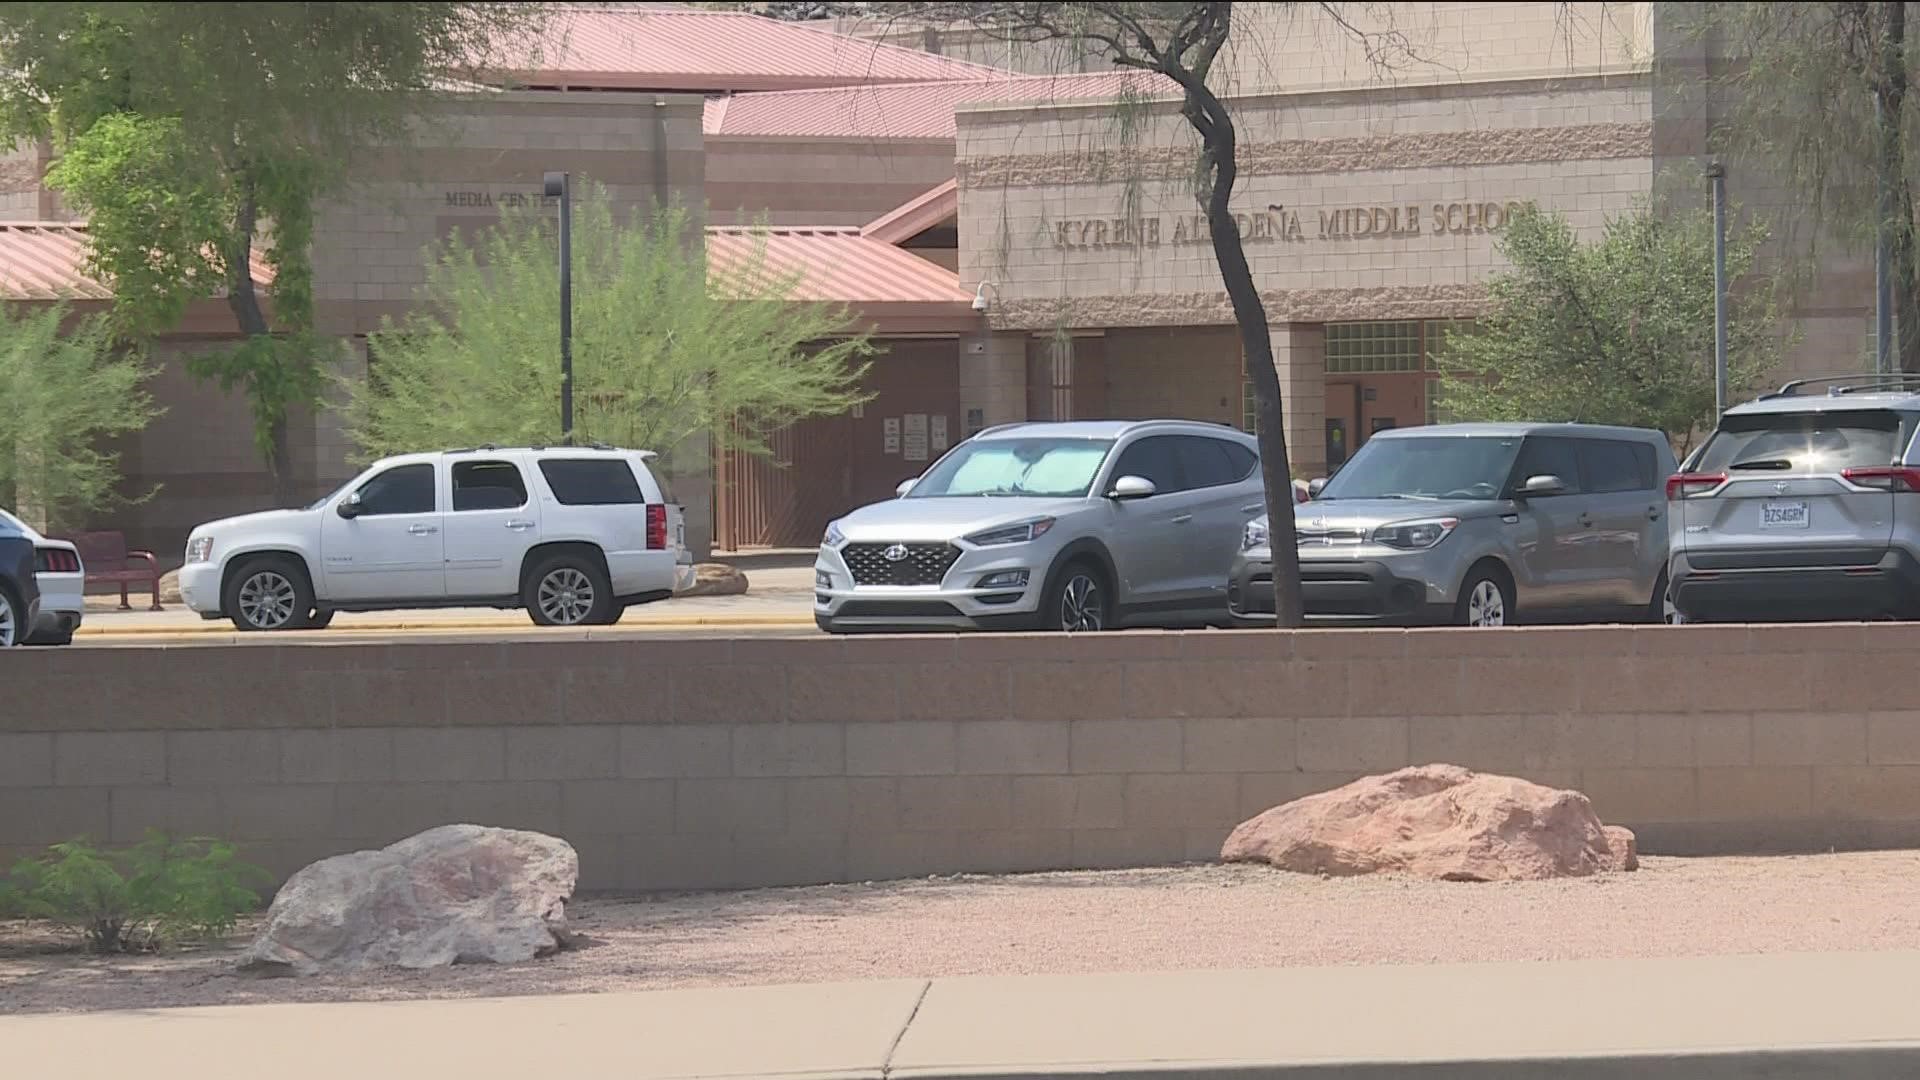 12News has confirmed the harassment occurred at Altadena Middle School in Ahwatukee. The district covers parts of Phoenix, Tempe and Chandler.